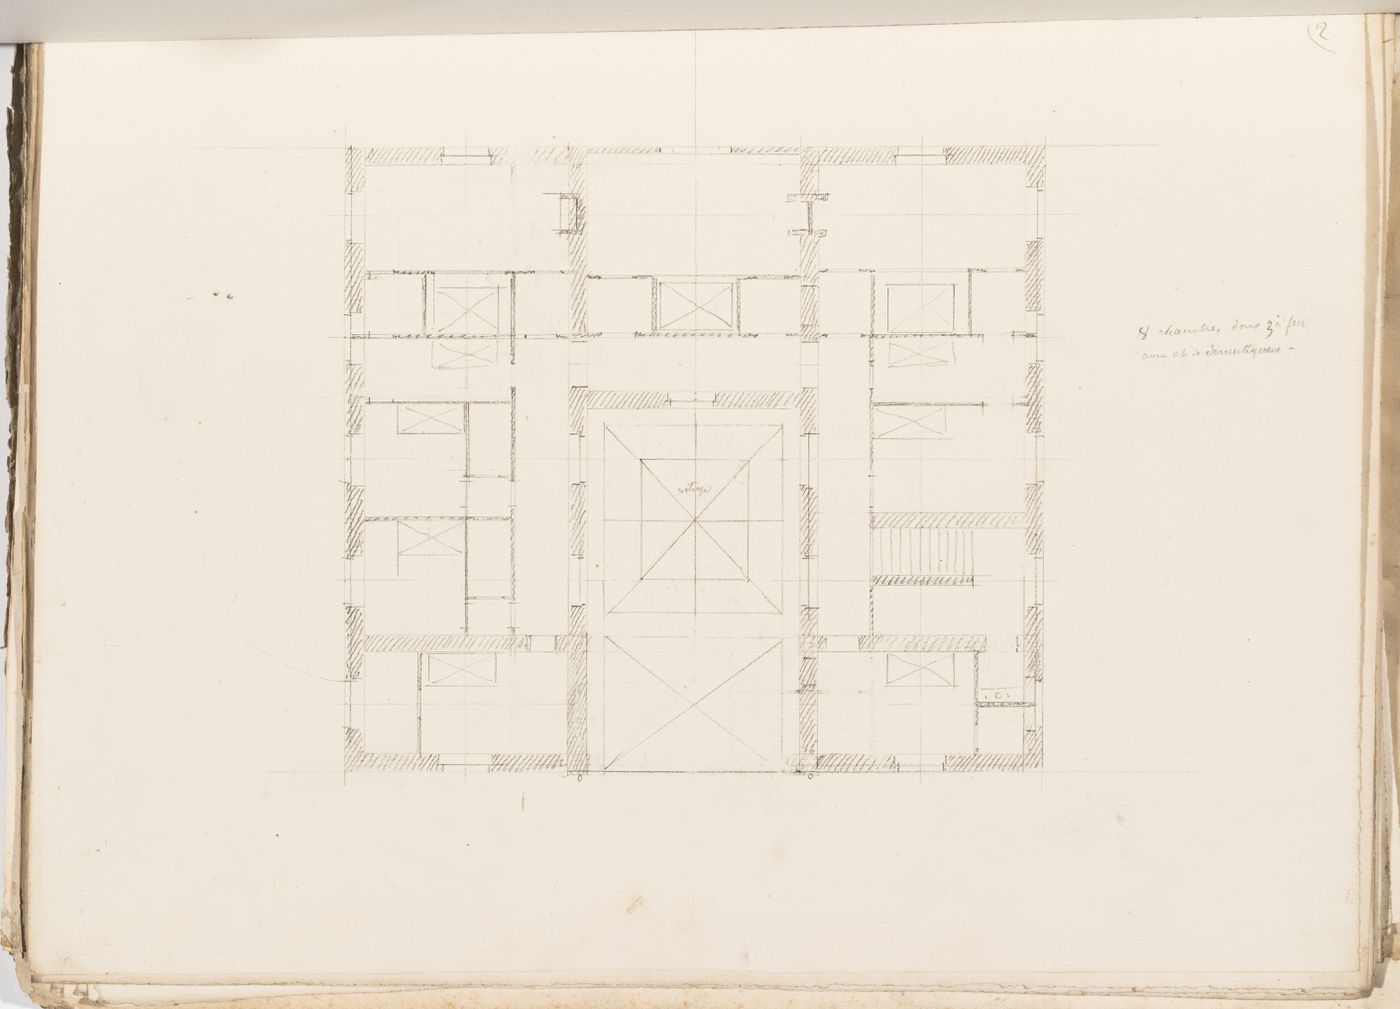 Project no. 2 for a country house for comte Treilhard: Second floor plan